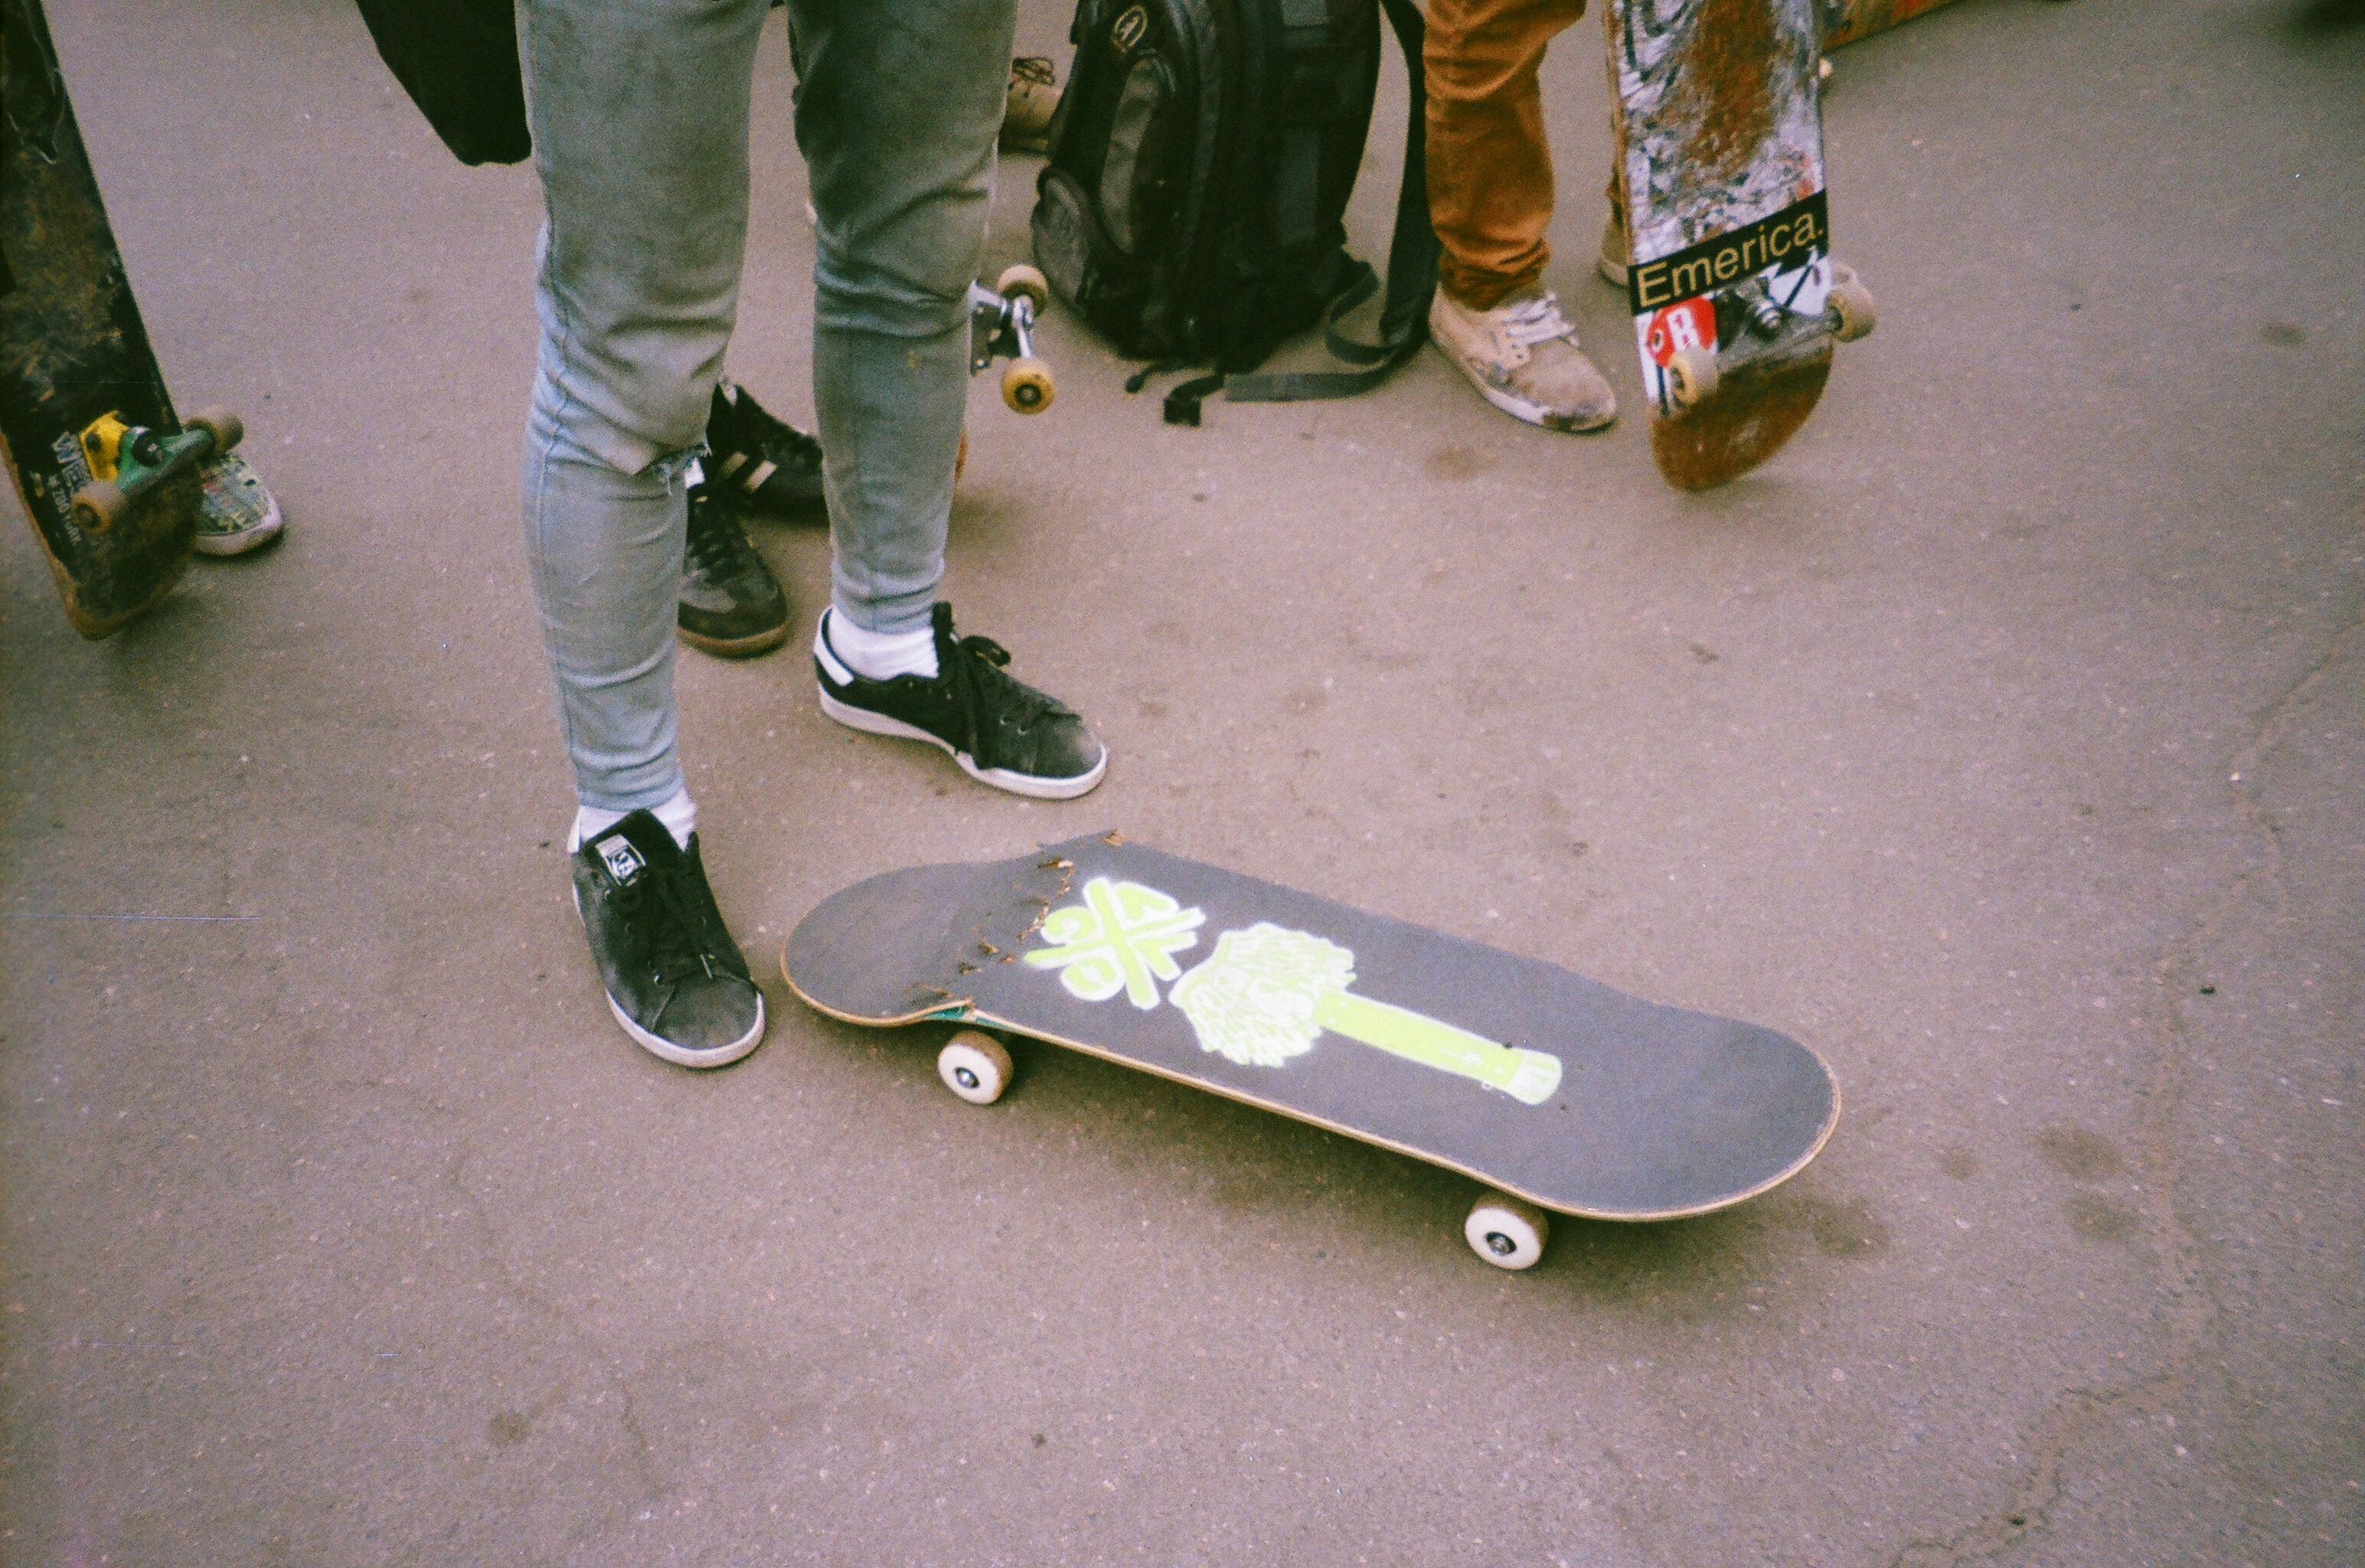 Learn information about the shop decks from staff that love their board